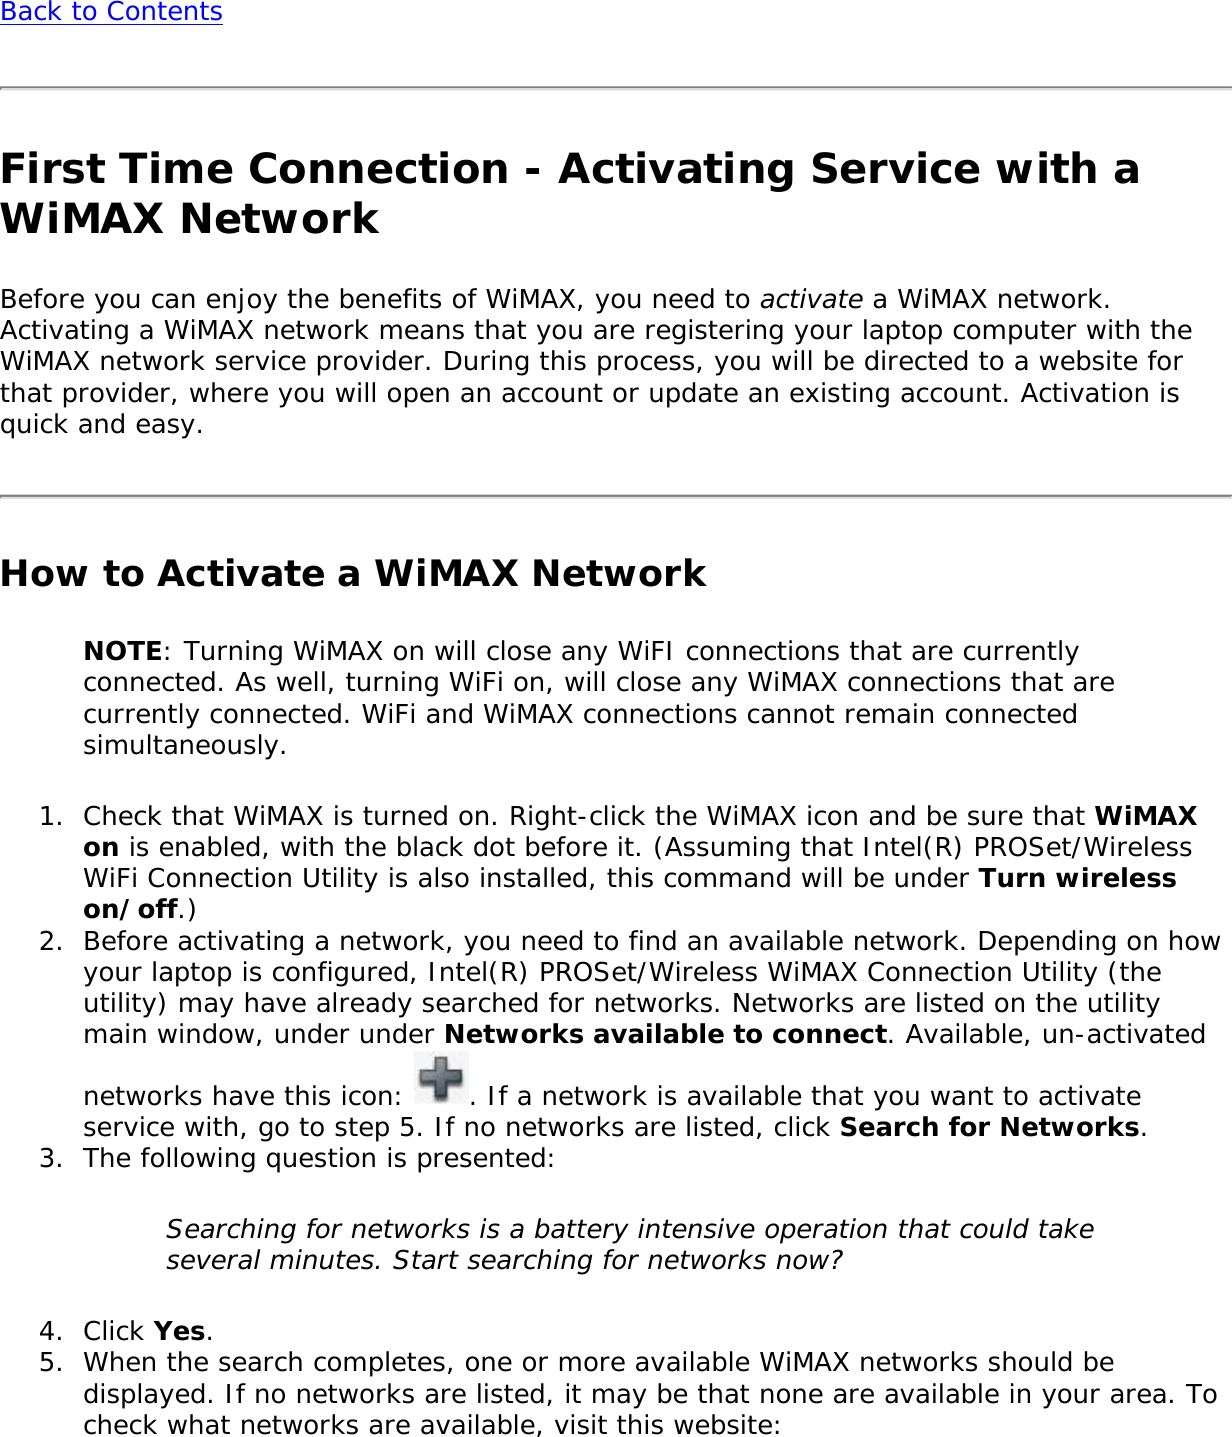 Back to ContentsFirst Time Connection - Activating Service with a WiMAX NetworkBefore you can enjoy the benefits of WiMAX, you need to activate a WiMAX network. Activating a WiMAX network means that you are registering your laptop computer with the WiMAX network service provider. During this process, you will be directed to a website for that provider, where you will open an account or update an existing account. Activation is quick and easy. How to Activate a WiMAX NetworkNOTE: Turning WiMAX on will close any WiFI connections that are currently connected. As well, turning WiFi on, will close any WiMAX connections that are currently connected. WiFi and WiMAX connections cannot remain connected simultaneously. 1.  Check that WiMAX is turned on. Right-click the WiMAX icon and be sure that WiMAX on is enabled, with the black dot before it. (Assuming that Intel(R) PROSet/Wireless WiFi Connection Utility is also installed, this command will be under Turn wireless on/off.) 2.  Before activating a network, you need to find an available network. Depending on how your laptop is configured, Intel(R) PROSet/Wireless WiMAX Connection Utility (the utility) may have already searched for networks. Networks are listed on the utility main window, under under Networks available to connect. Available, un-activated networks have this icon:  . If a network is available that you want to activate service with, go to step 5. If no networks are listed, click Search for Networks. 3.  The following question is presented: Searching for networks is a battery intensive operation that could take several minutes. Start searching for networks now? 4.  Click Yes. 5.  When the search completes, one or more available WiMAX networks should be displayed. If no networks are listed, it may be that none are available in your area. To check what networks are available, visit this website: 